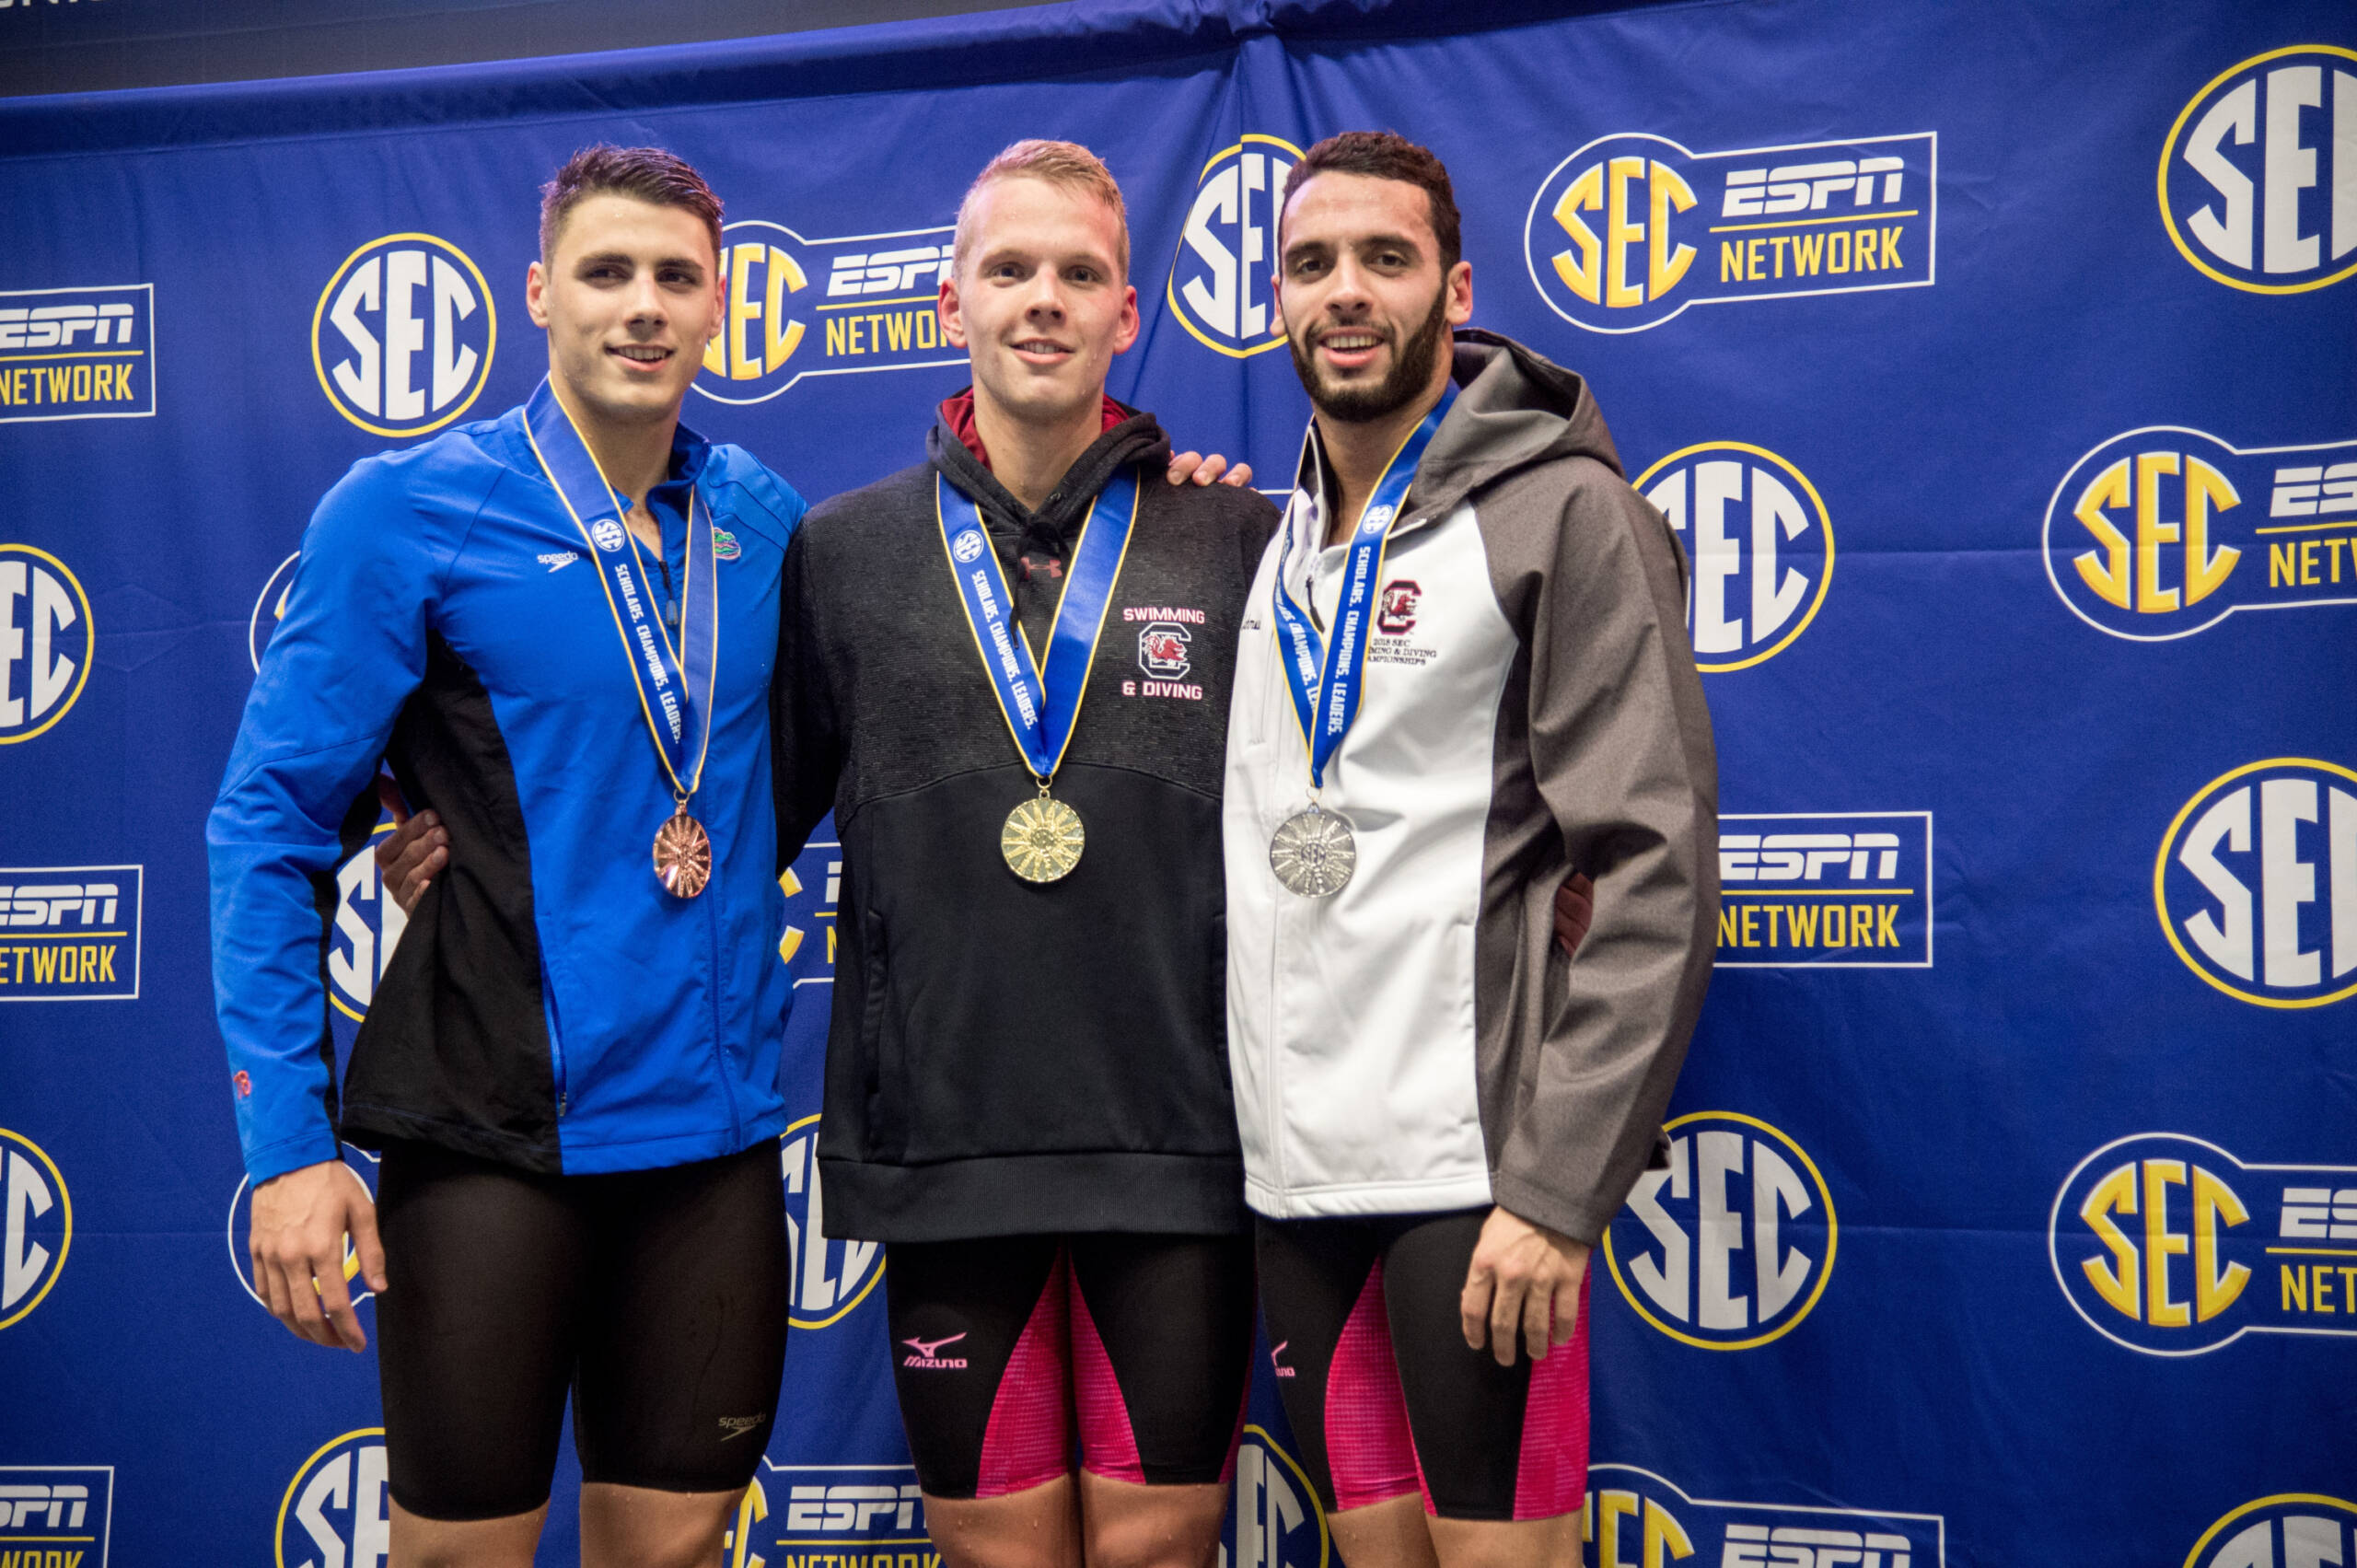 Minuth Sets SEC Record To Defend 500 Free Title